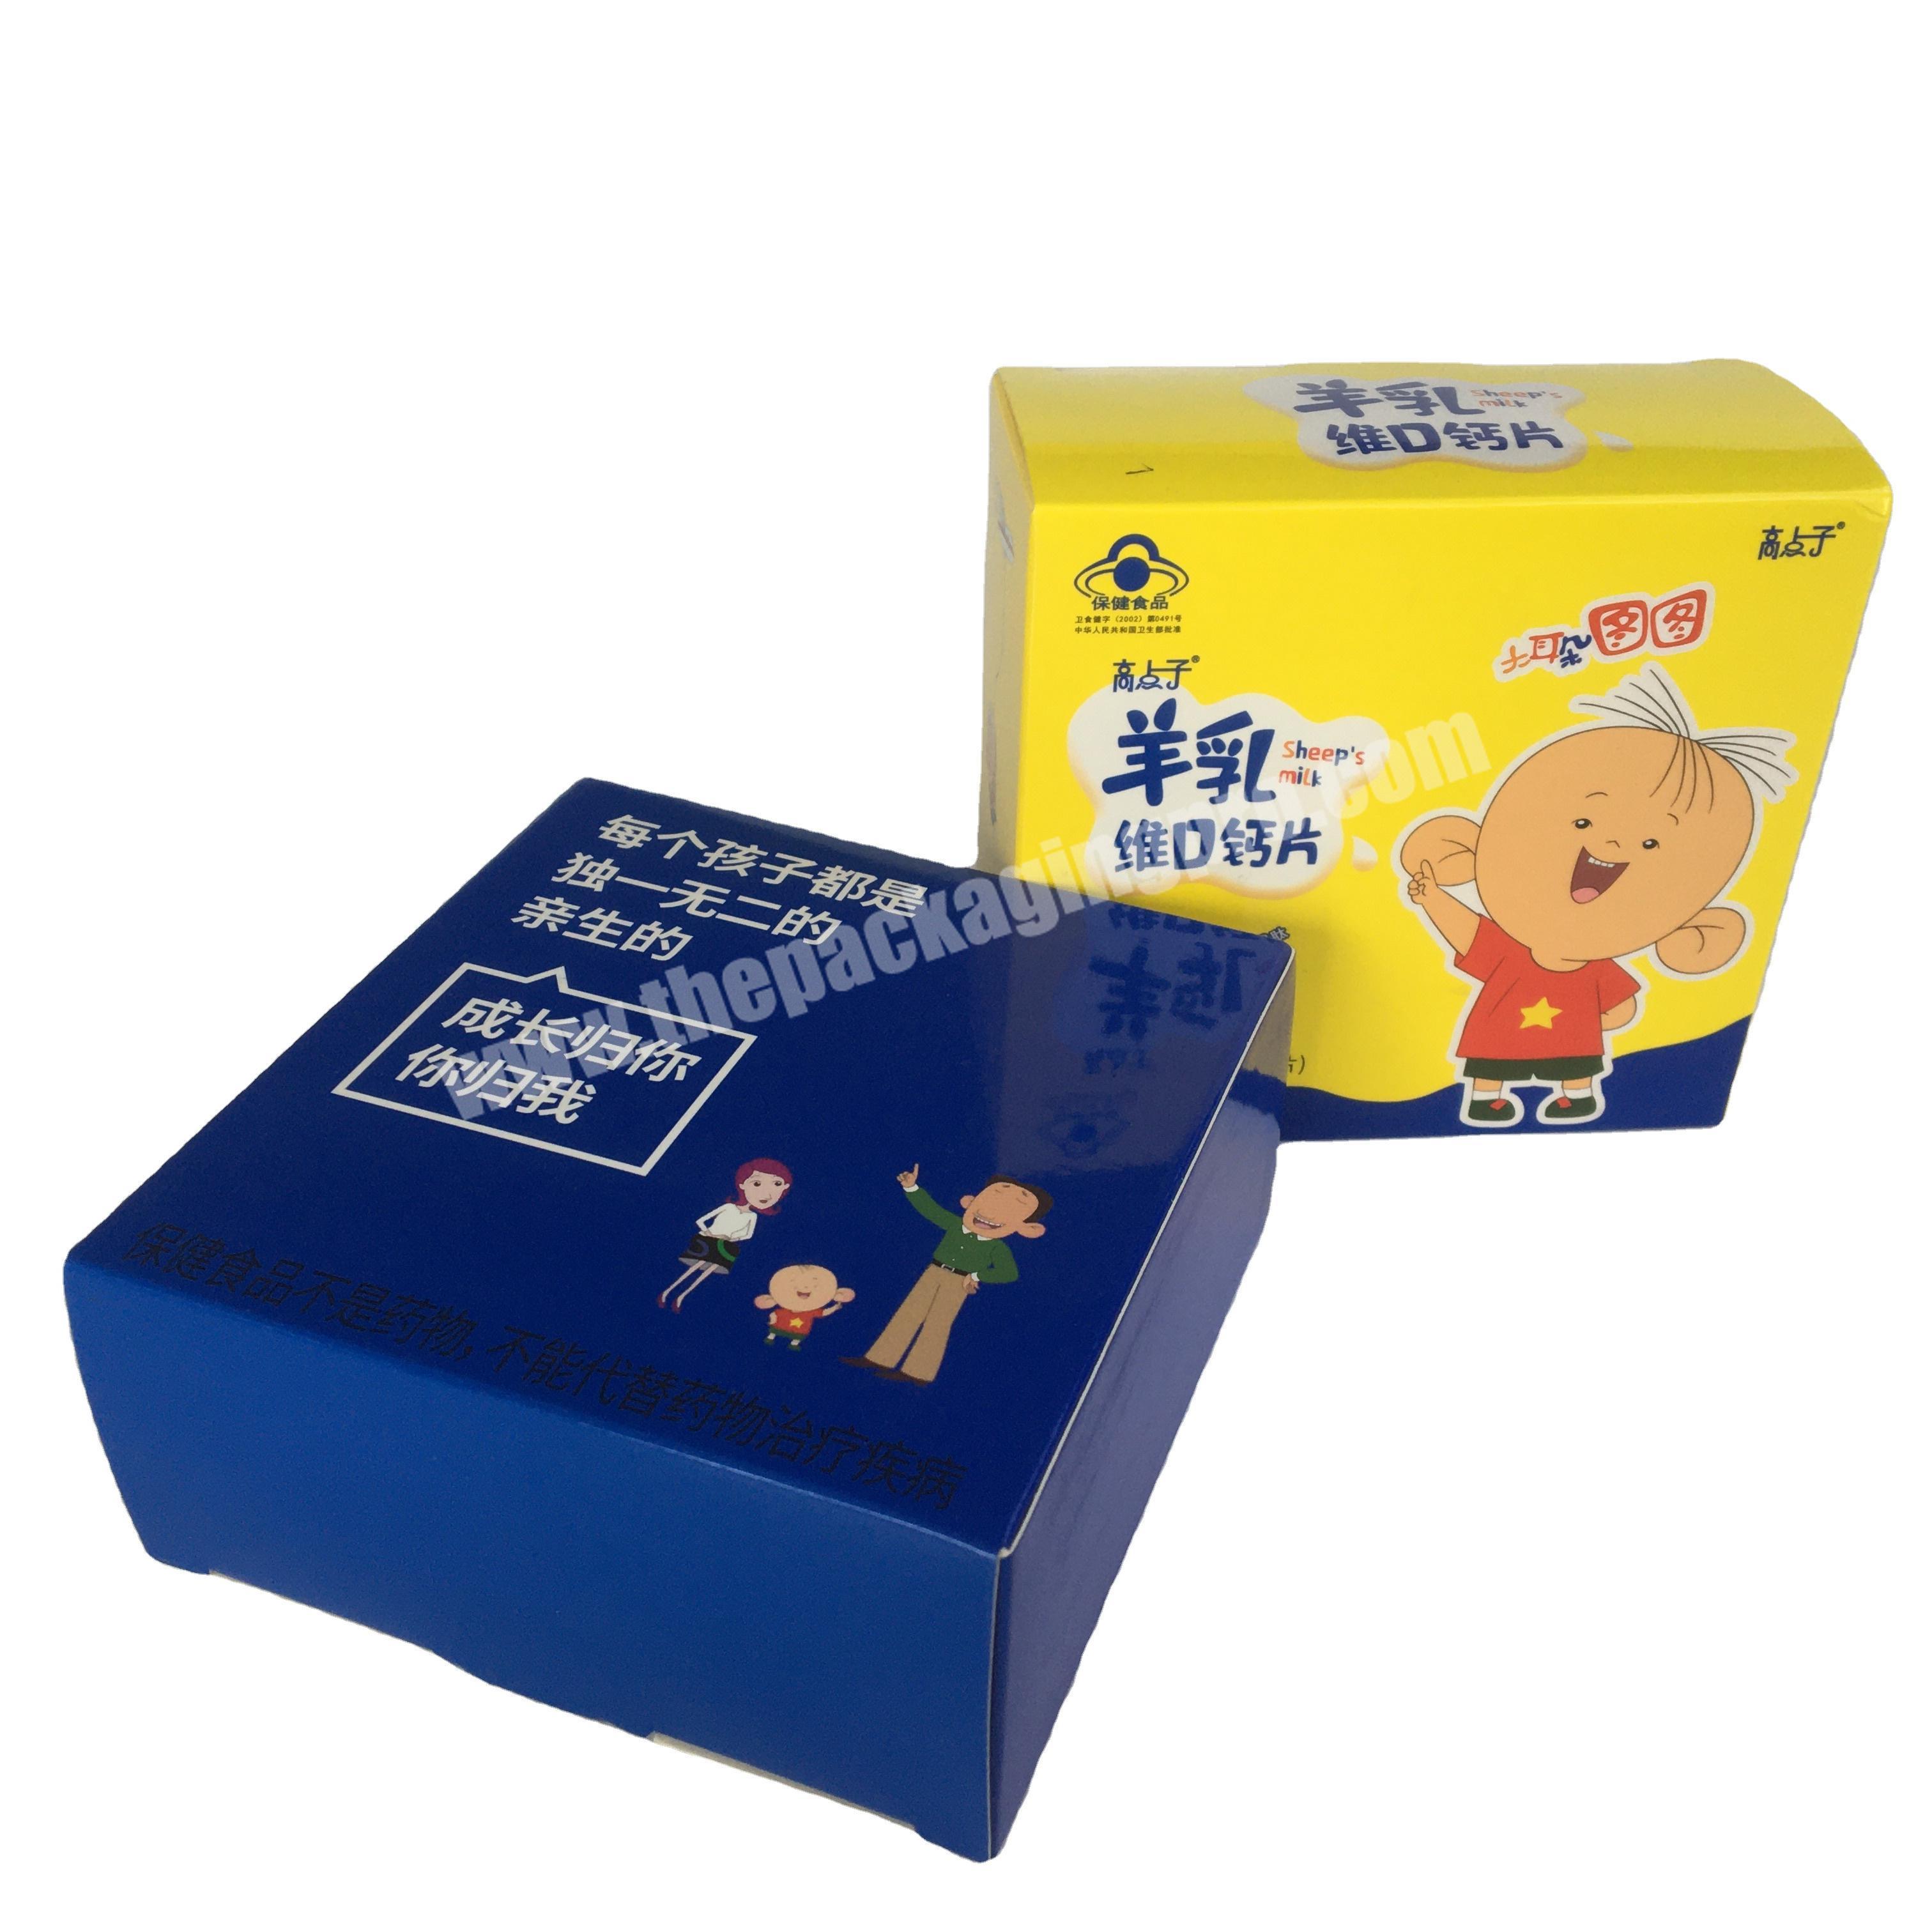 High quality cartoon design eco-friendly packing box . children's clothing packing box . ornament small packaging